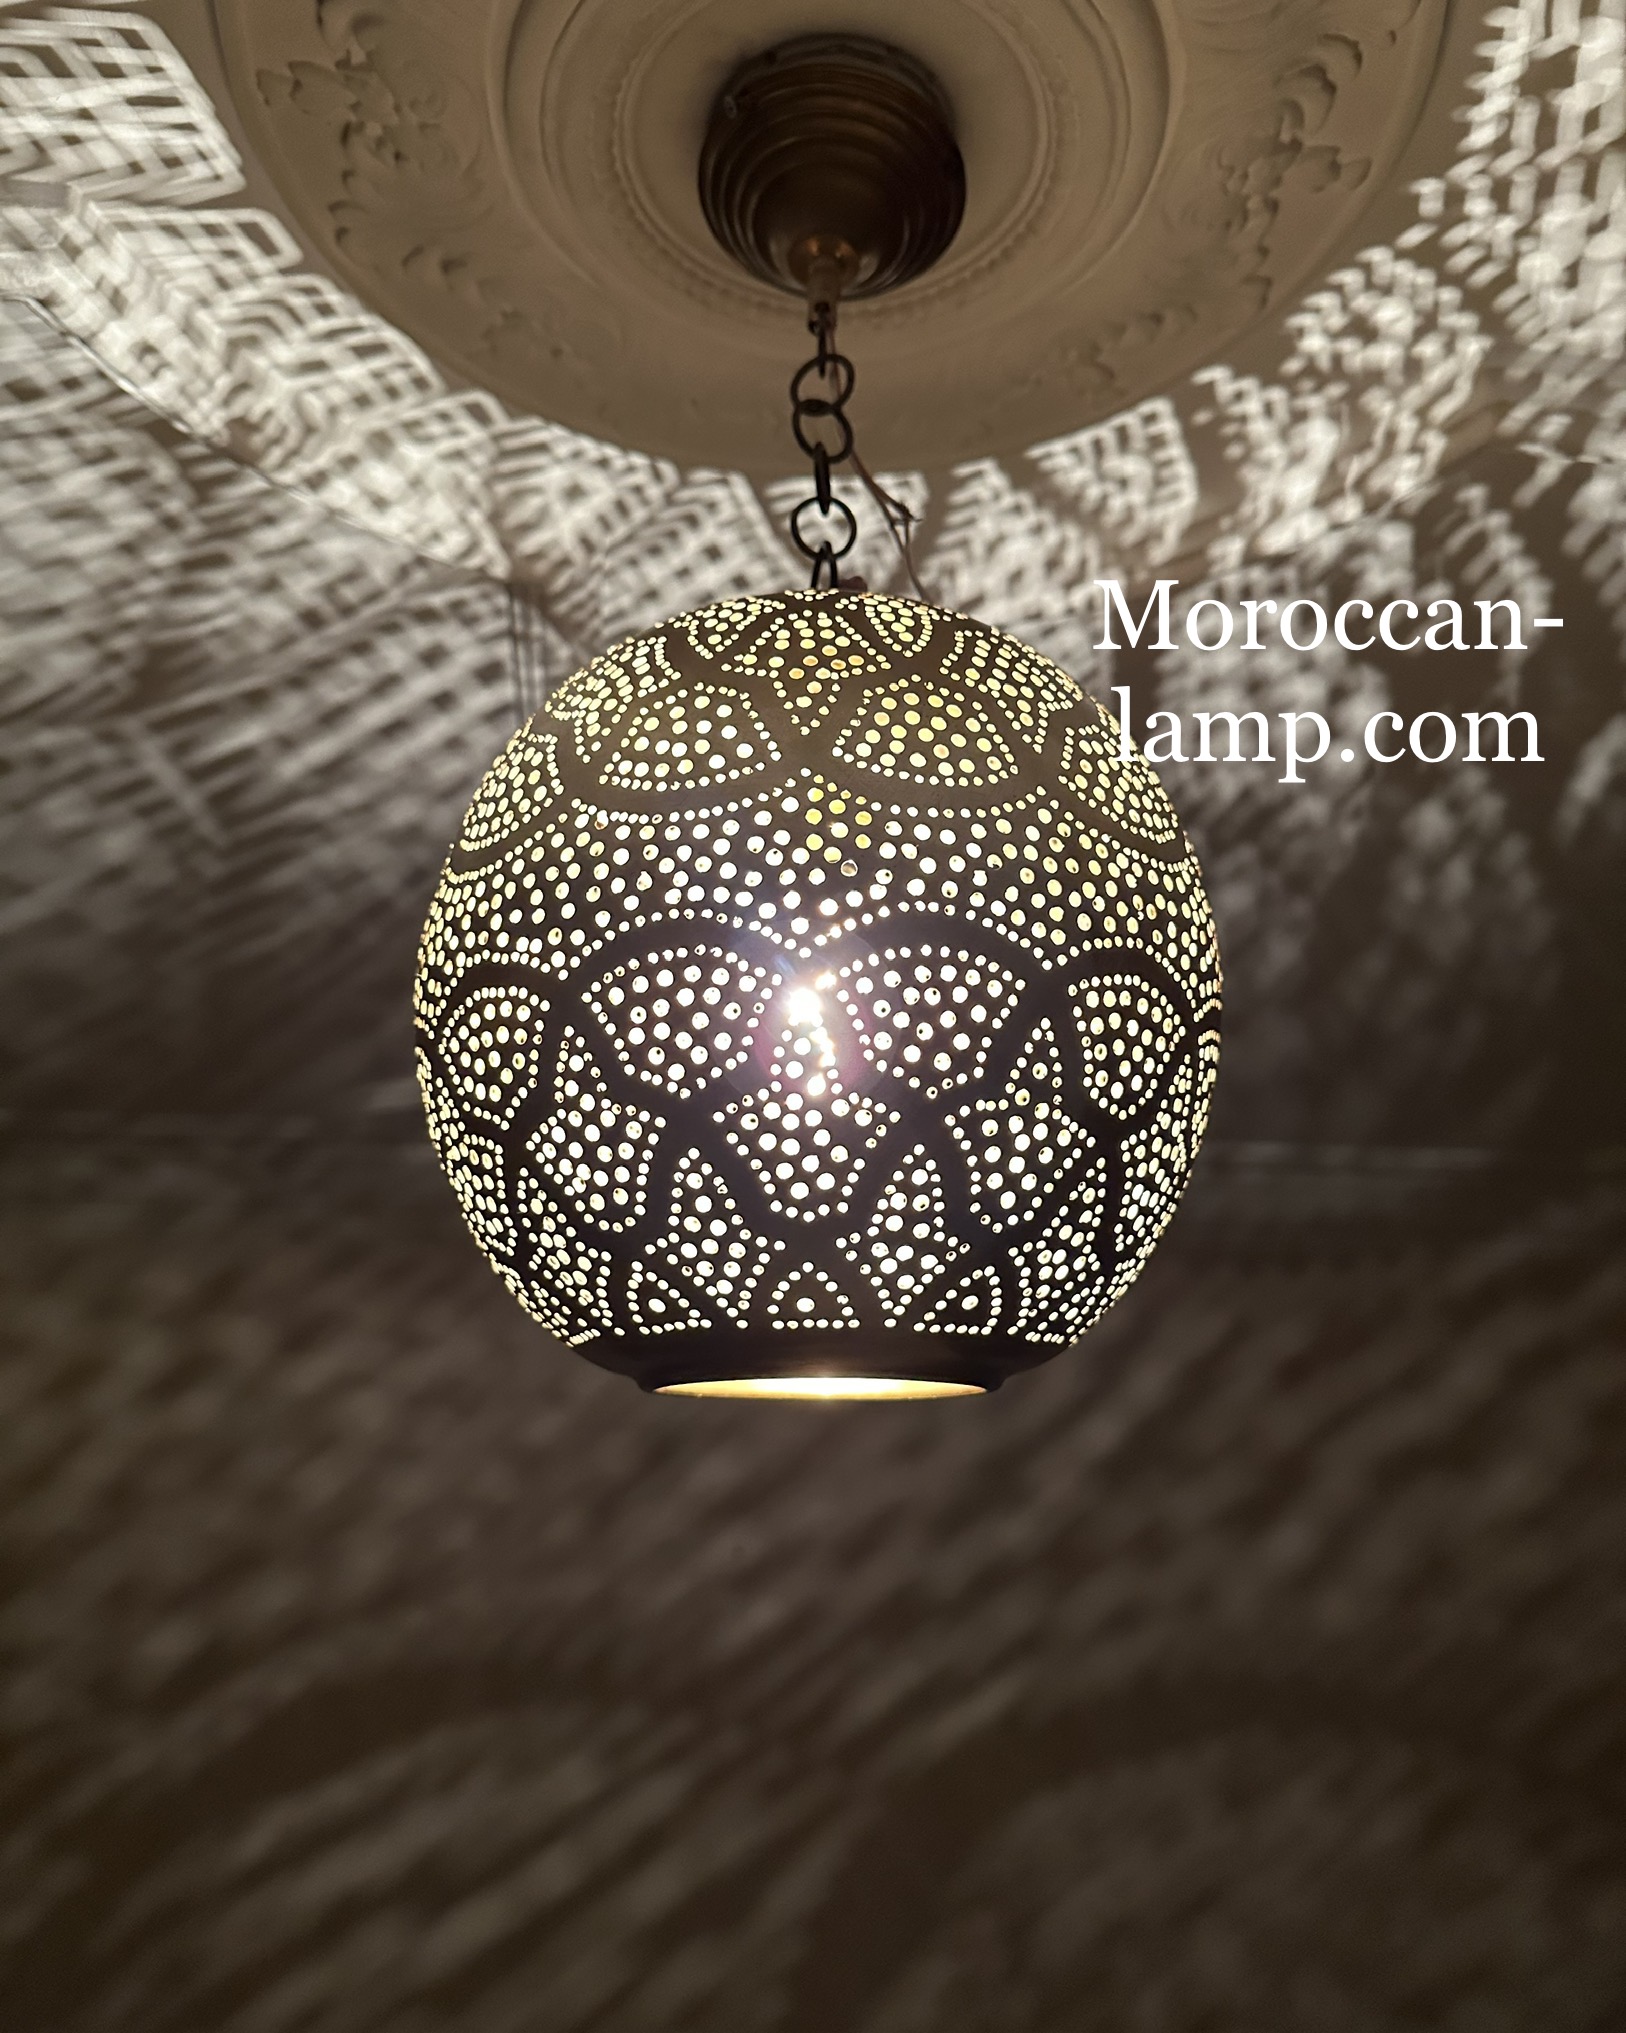 Moroccan Ceiling Lamp - Ref. 1027 - From